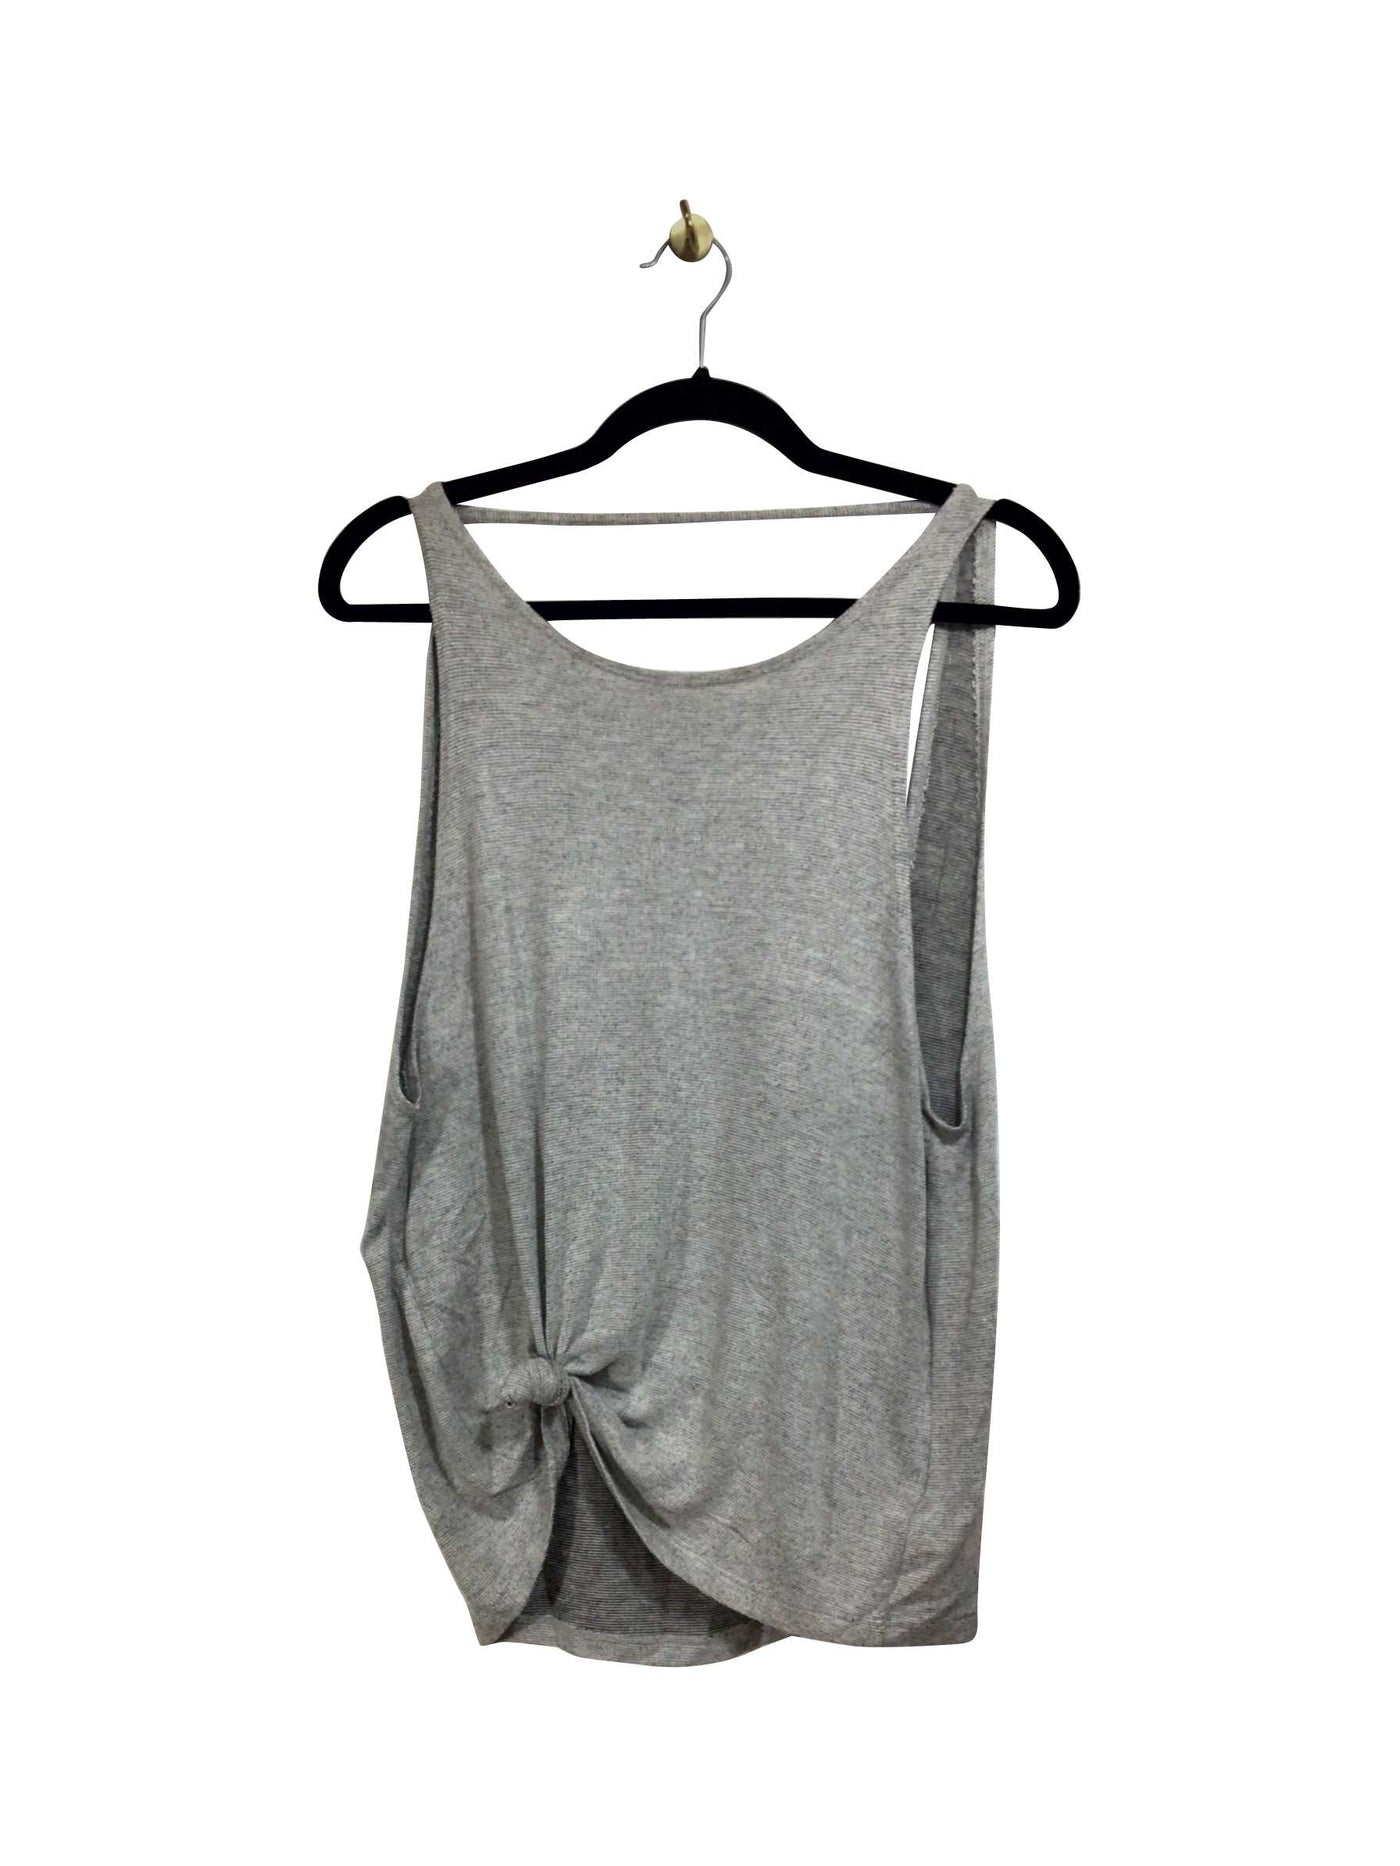 TRULY MADLY DEEPLY Regular fit T-shirt in Gray  -  S  7.99 Koop